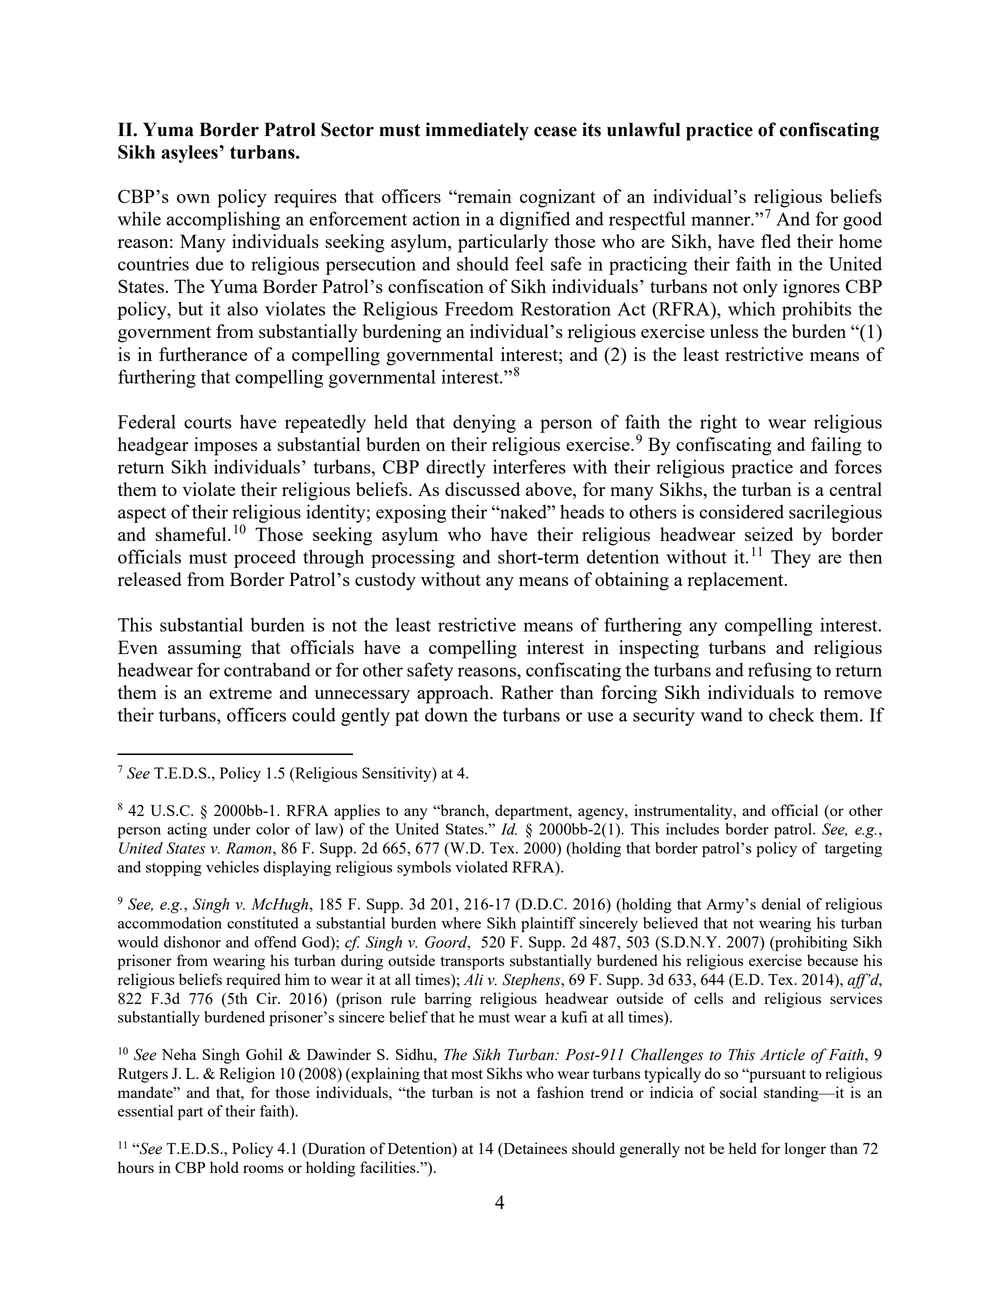 Page 4 from ACLU of Arizona Letter on Border Patrol Confiscating Sikhs’ Turbans